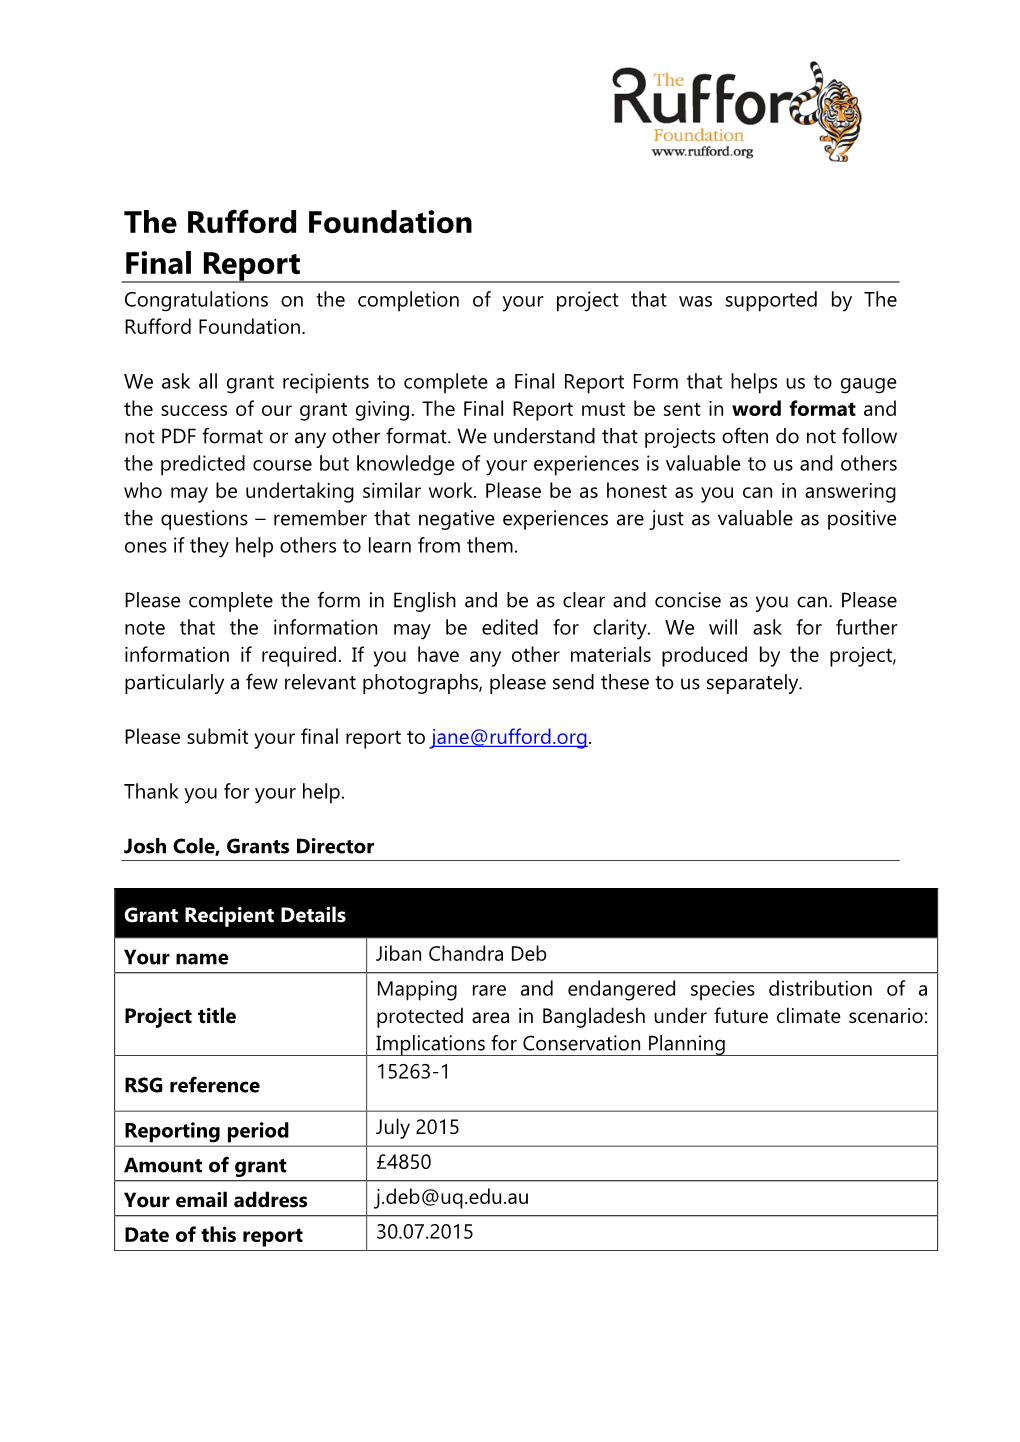 Final Report Congratulations on the Completion of Your Project That Was Supported by the Rufford Foundation